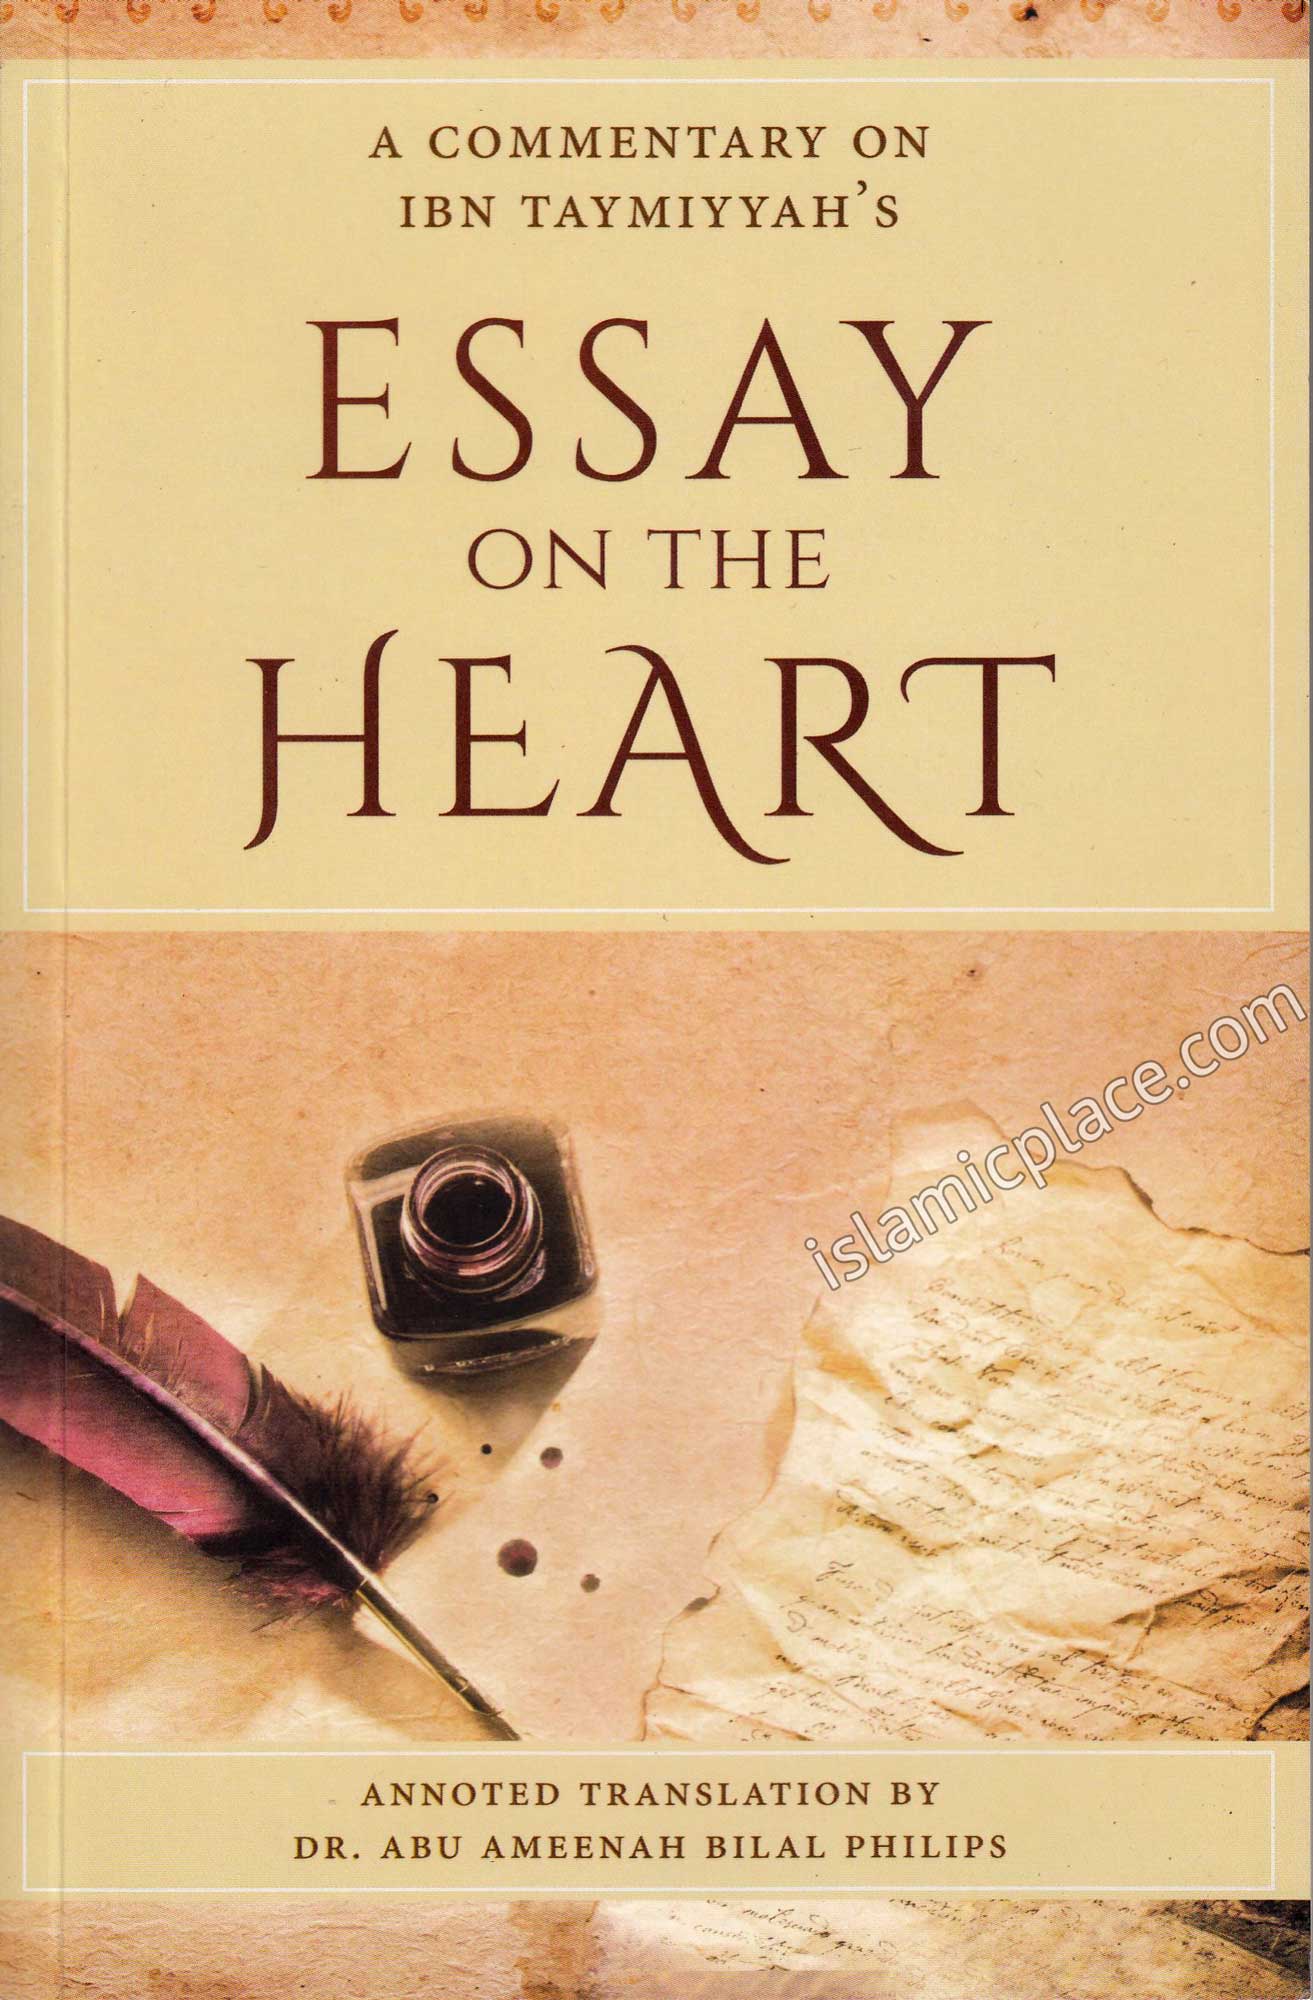 A Commentary on Ibn Taymiyyah's Essay on The Heart